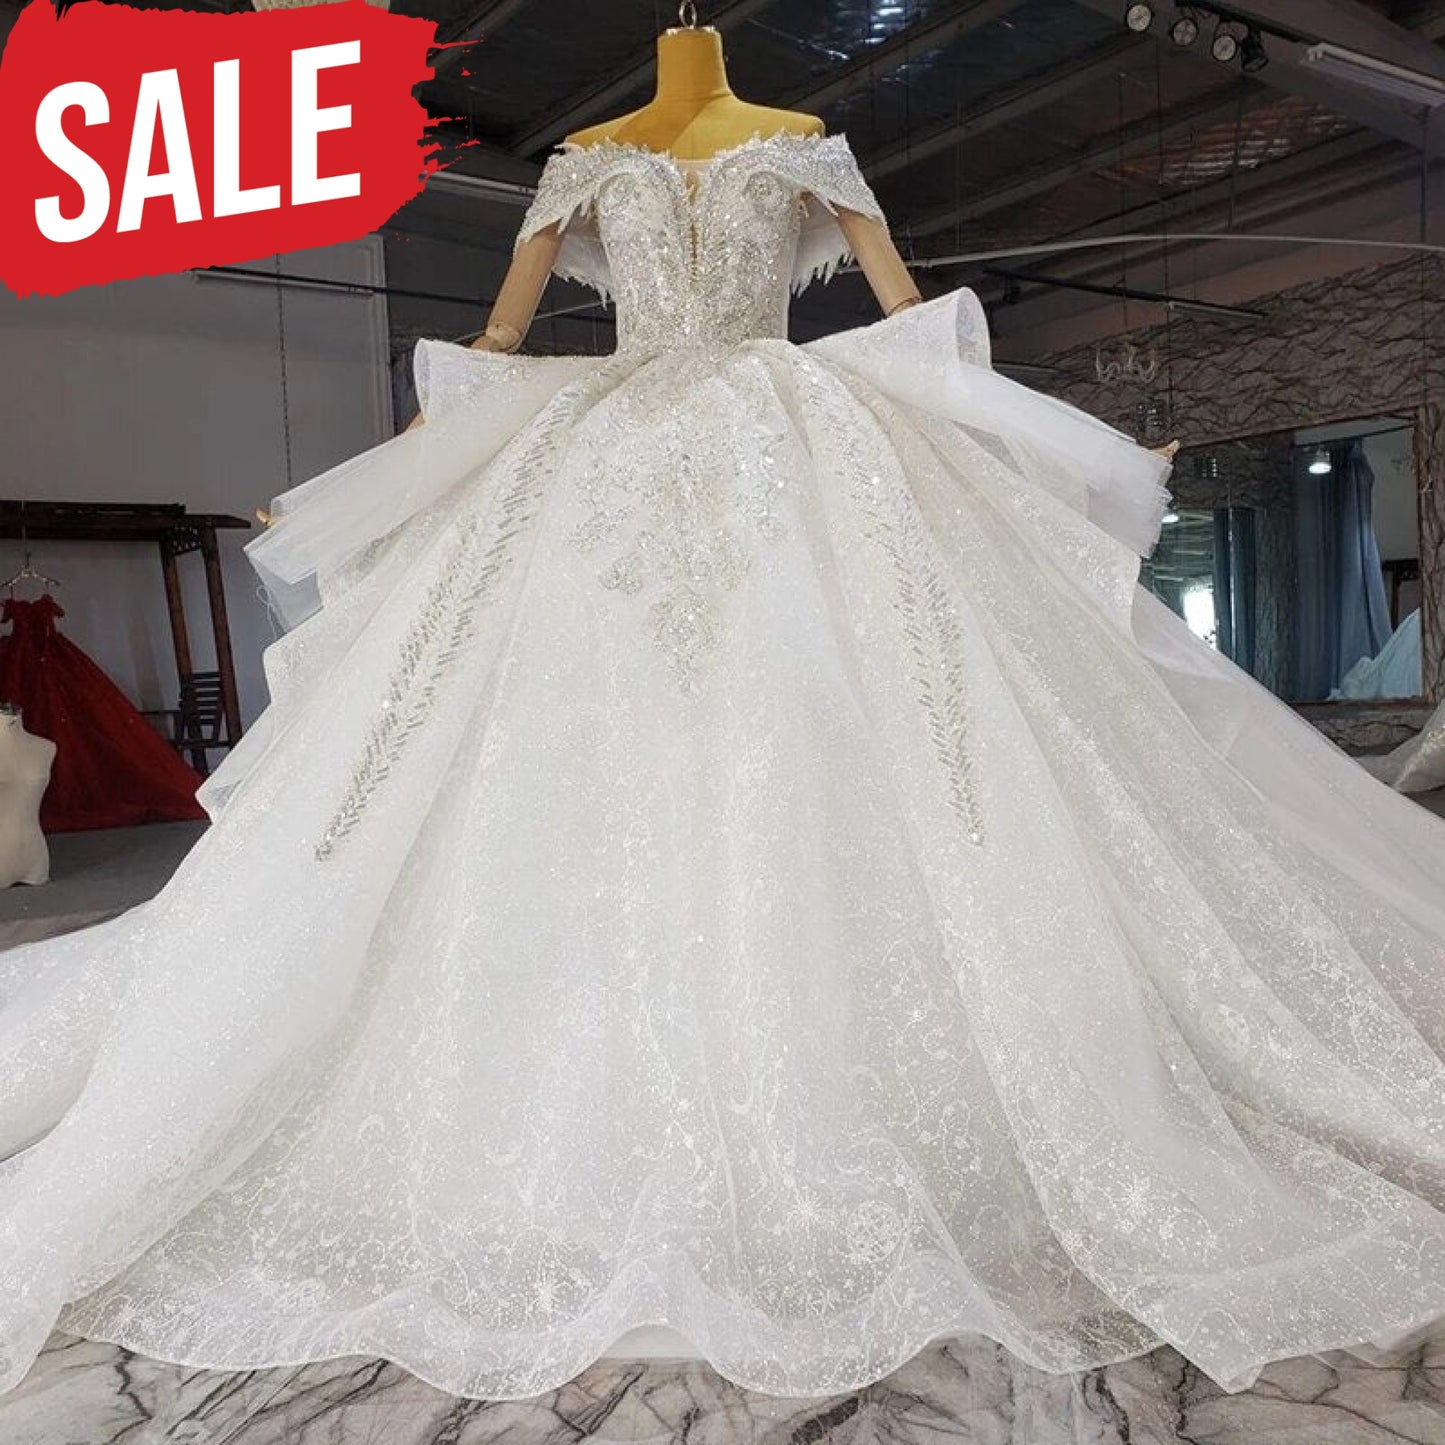 Luxurious Medieval White Wedding Gowns bLuxurious Medieval White Wedding Gown Luxurious Medieval White Wedding Gowns Luxurious Medieval White Wedding Gowns Luxurious Medieval White Wedding Gowns Luxurious Medieval White Wedding GownsLuxurious Medieval White Wedding Gowns